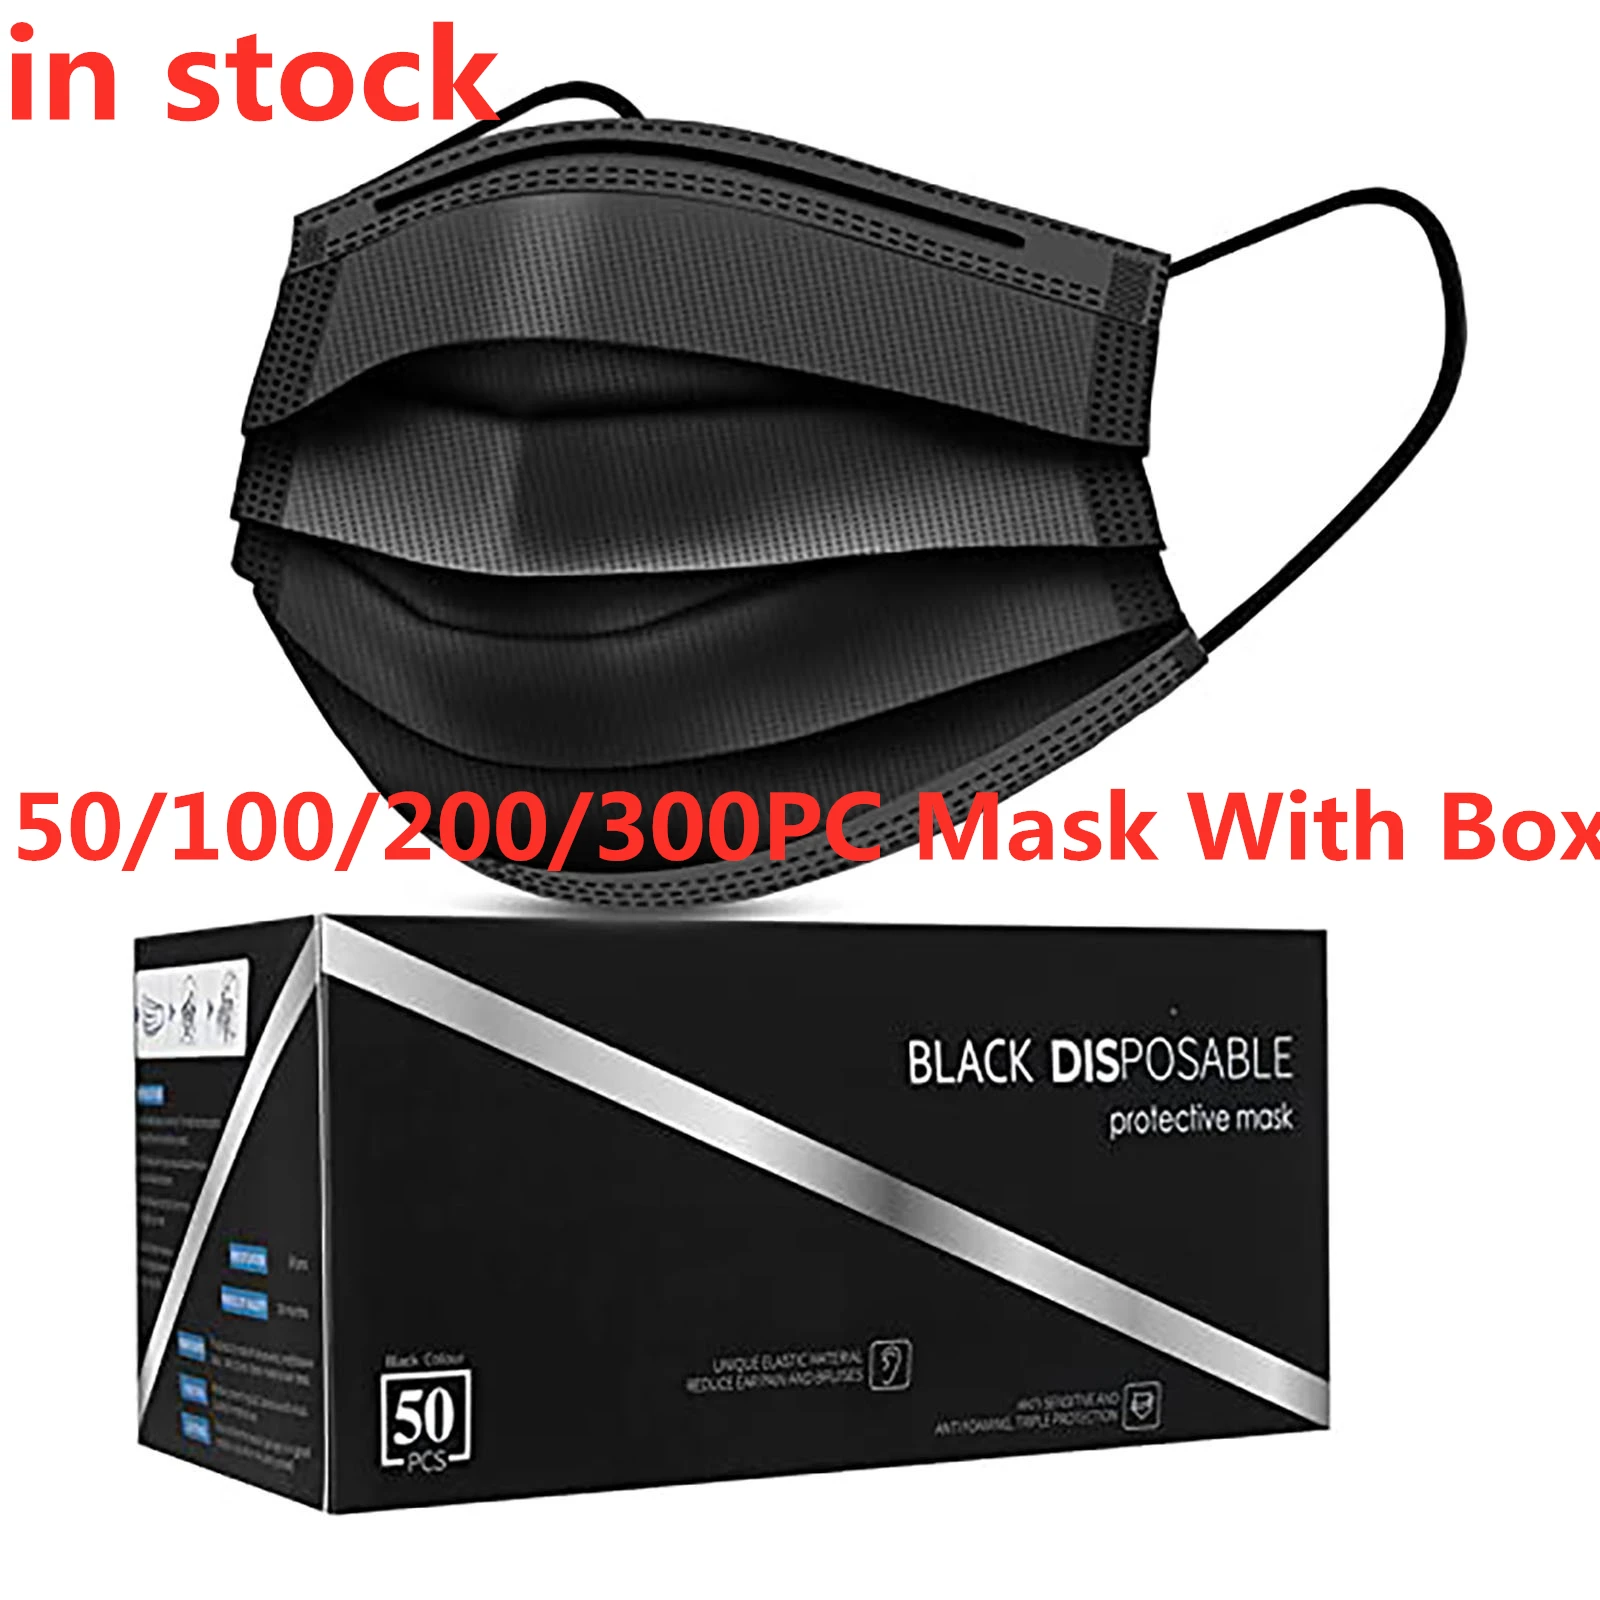 50/100/200/300pcs Black Masks With Box Disposable Face Mask Black Nonwove 3 Layer Mouth Mask Filter Halloween Cosplay Mascarilla funny adult halloween costumes